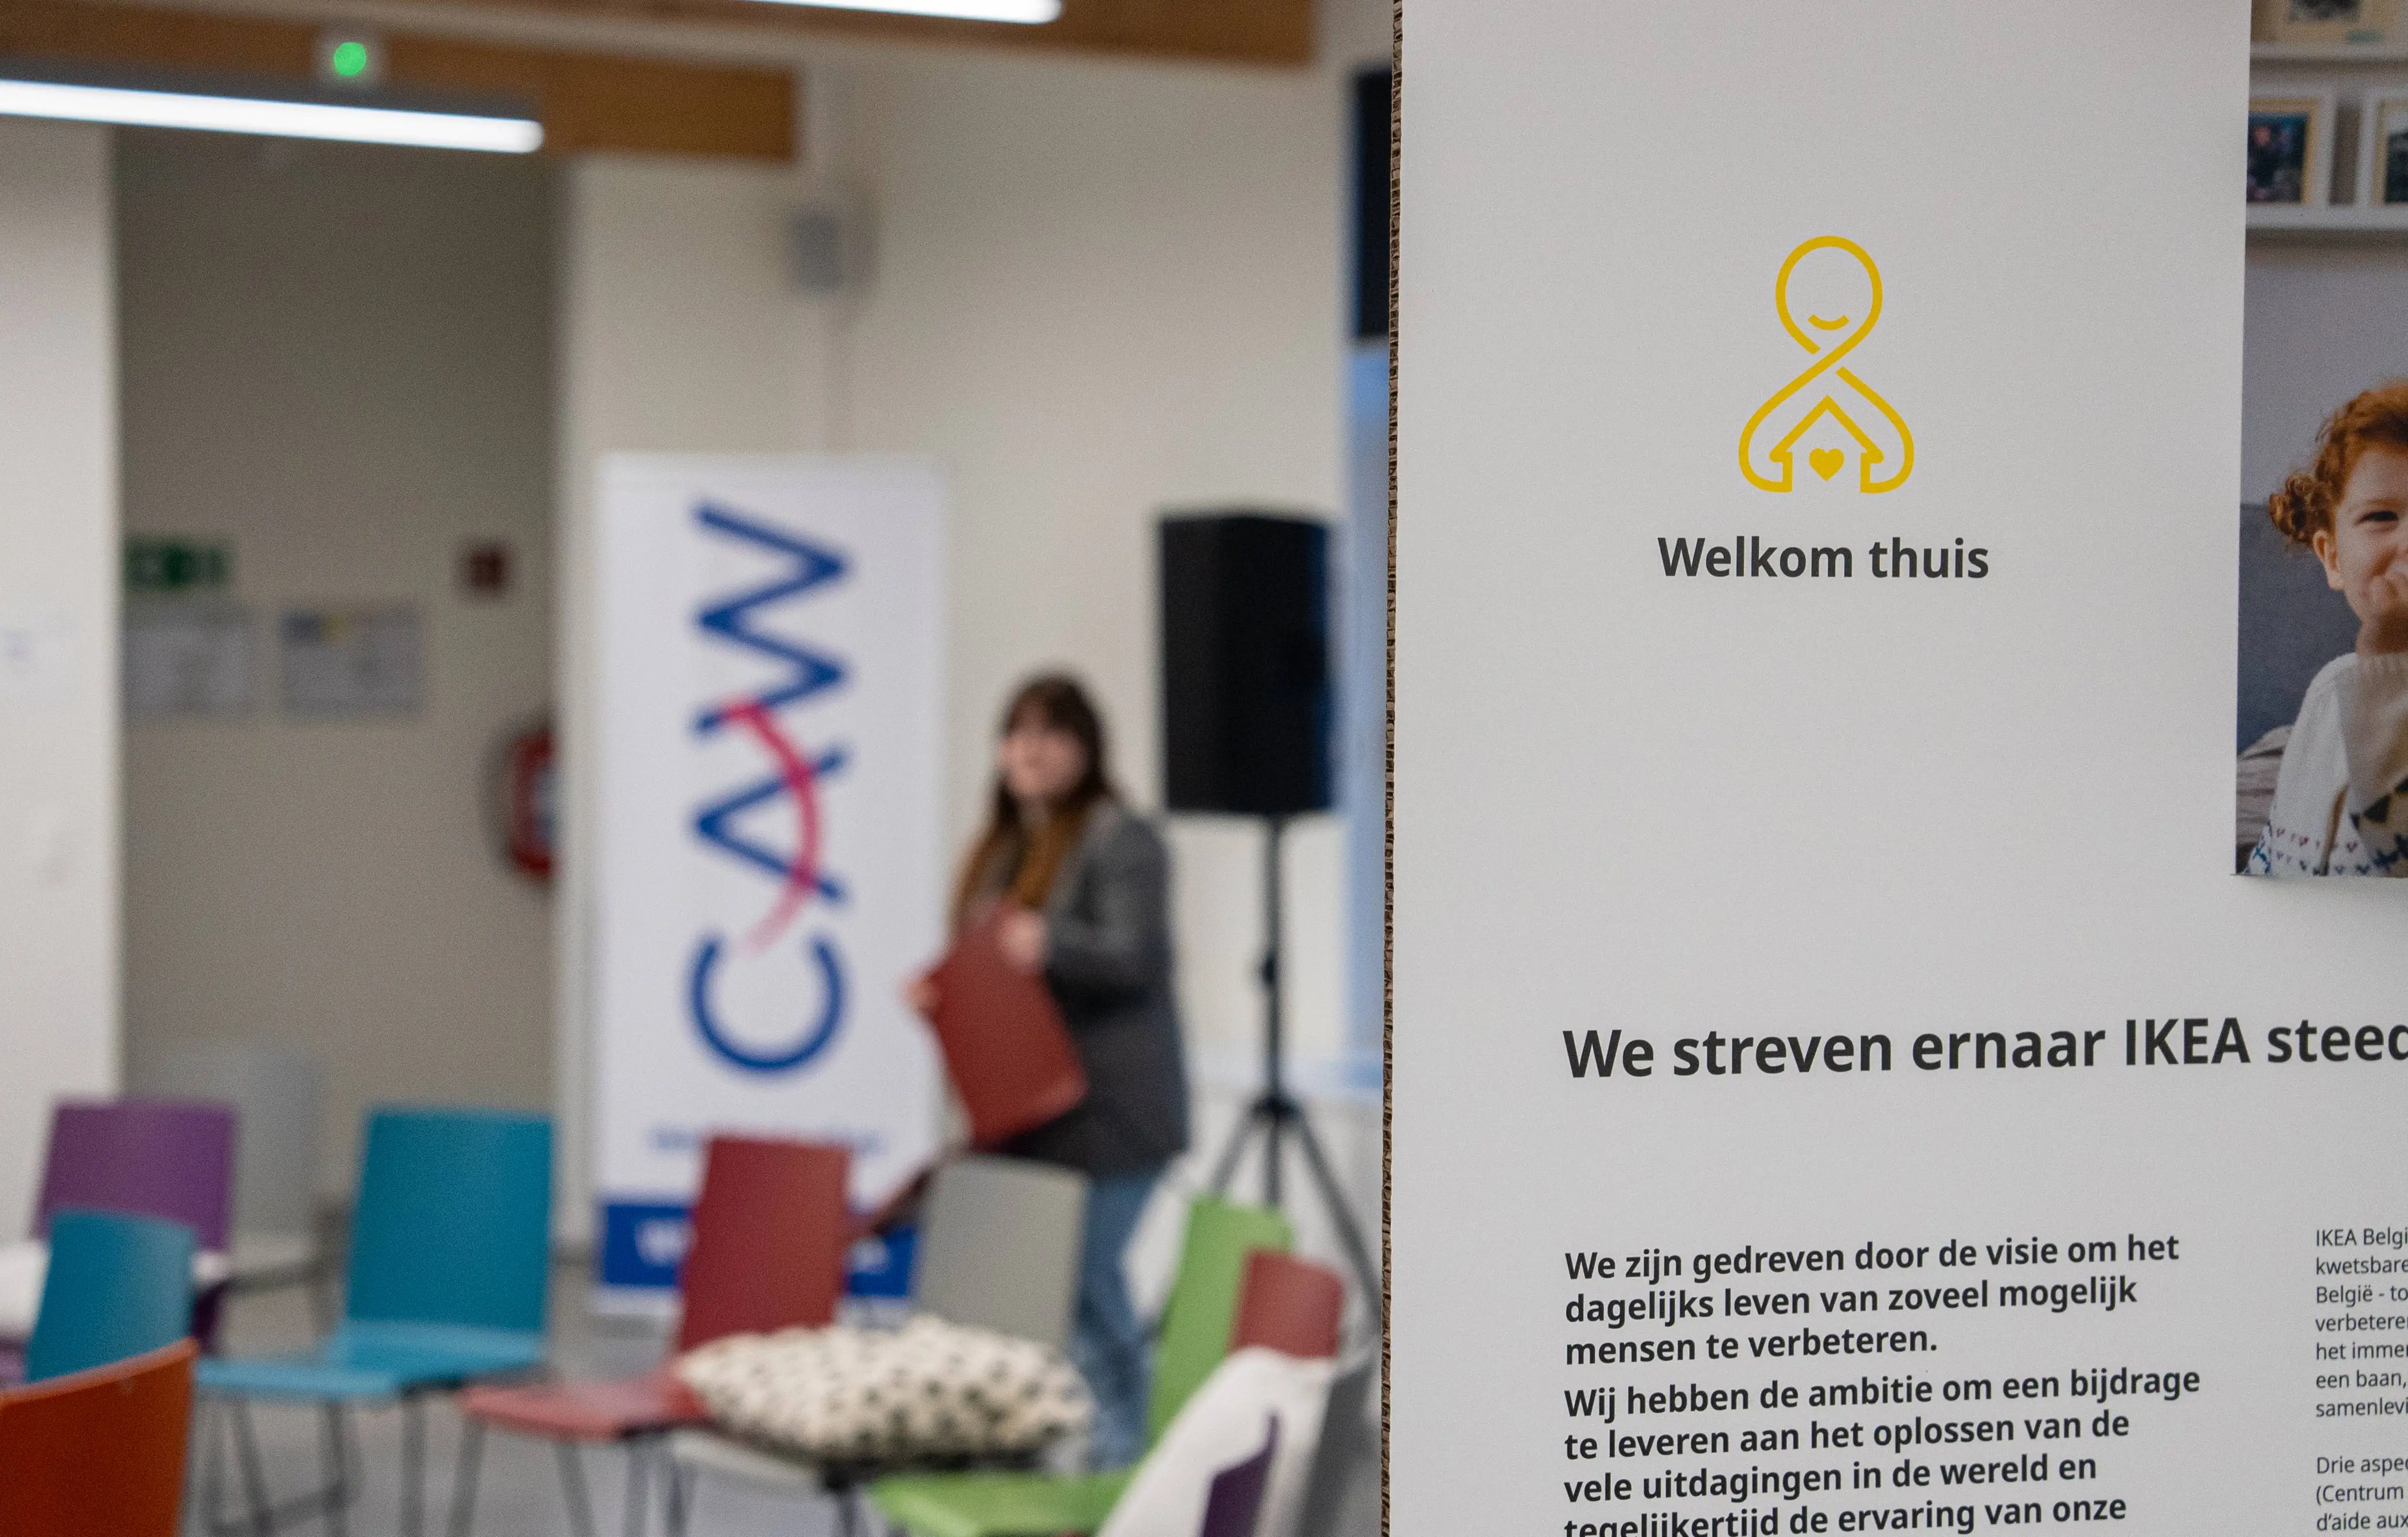 Decorative sign indicating the project name in Dutch as “Welkom Thuis” with an empty room in the background.